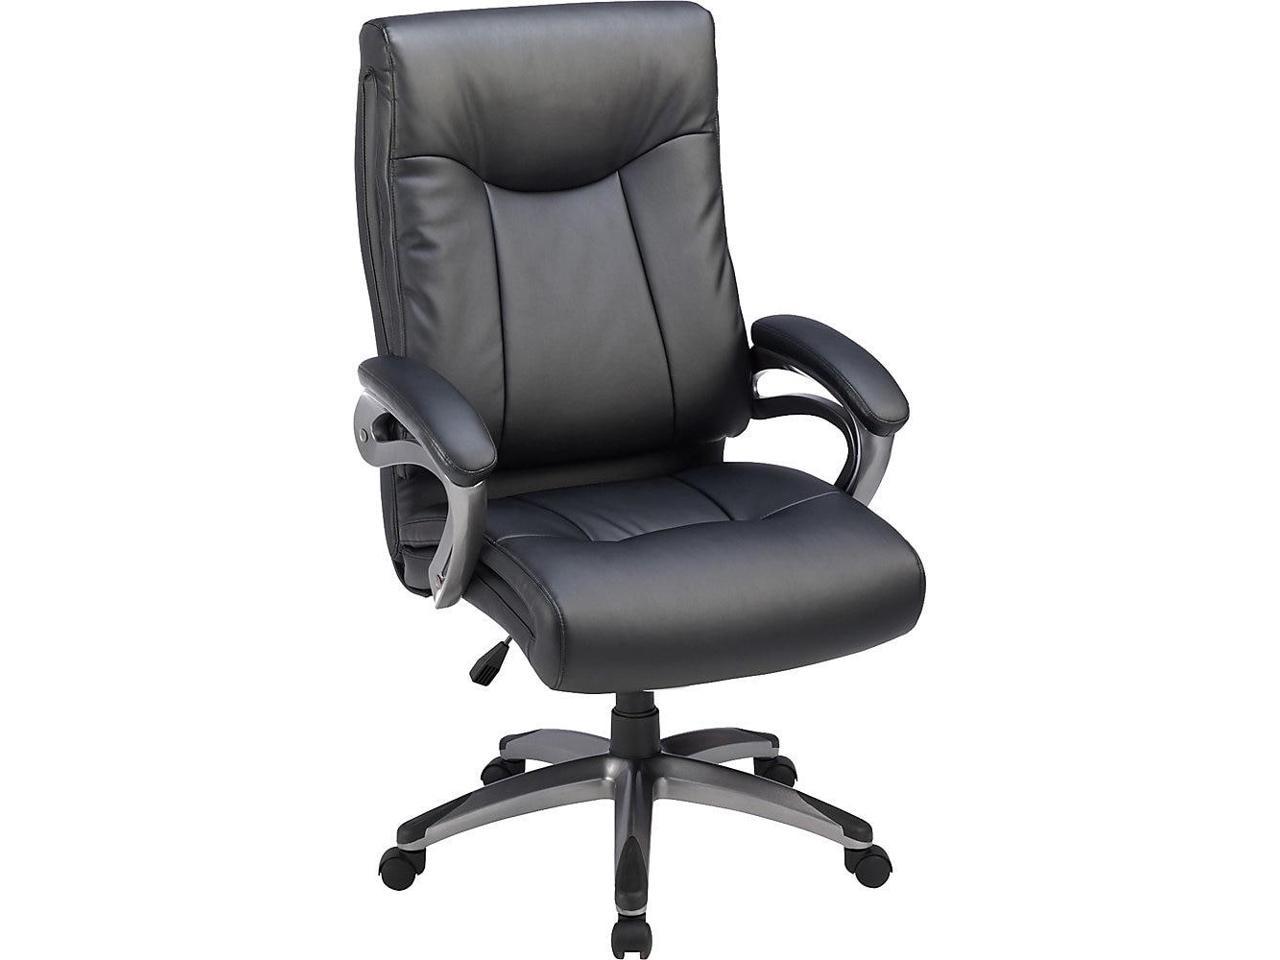 Lorell High-Back Exec Chair Leather 27"x30"x46-1/2" BK 69516 - image 2 of 7